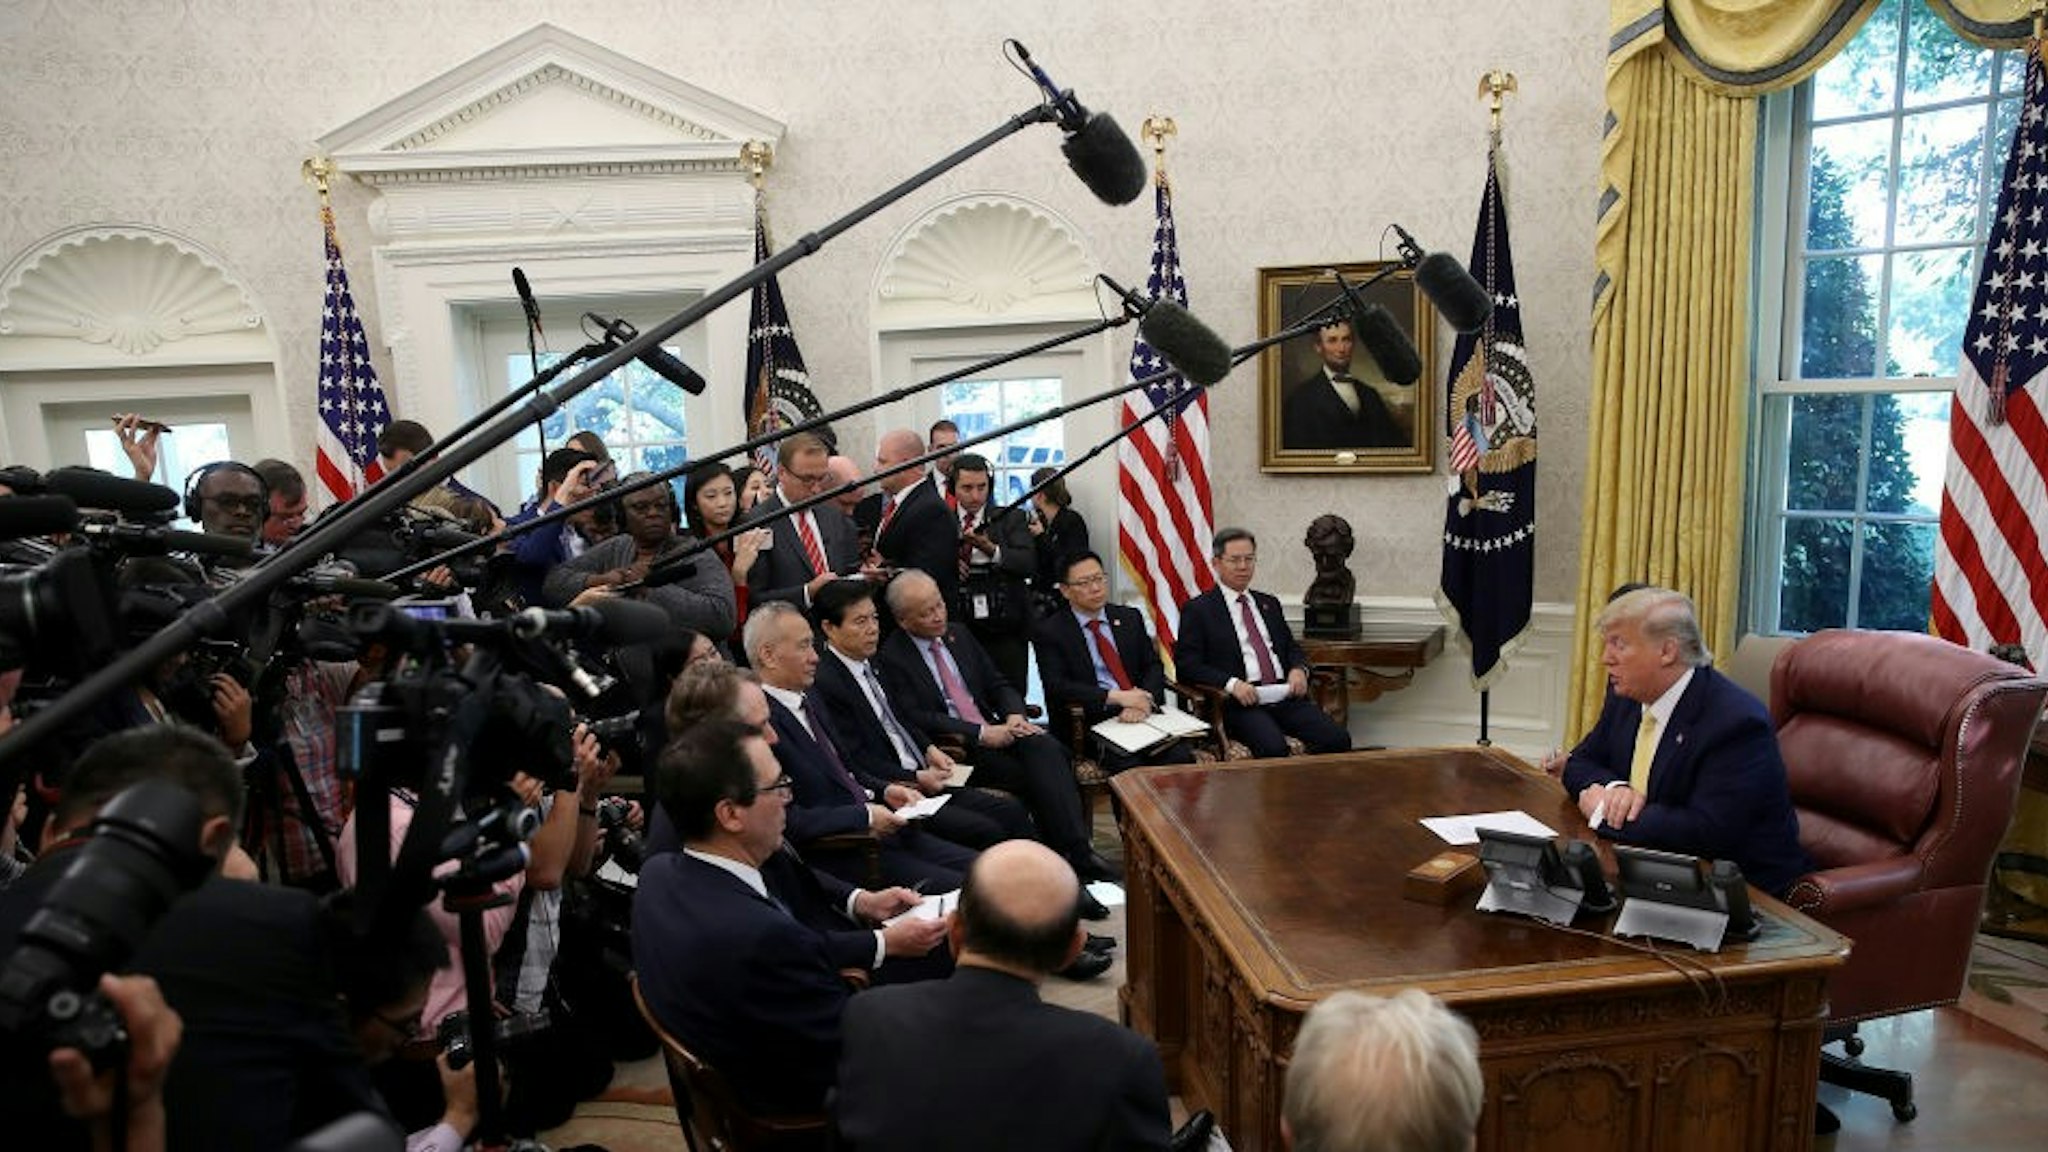 U.S. President Donald Trump meets with Chinese Vice Premier Liu He and members of the trade negotiation teams while announcing a "phase one" trade agreement with China in the Oval Office at the White House October 11, 2019 in Washington, DC. China and the United States have slapped each other with hundreds of billions of dollars in tariffs since the current trade war began between the world’s two largest national economies in 2018.